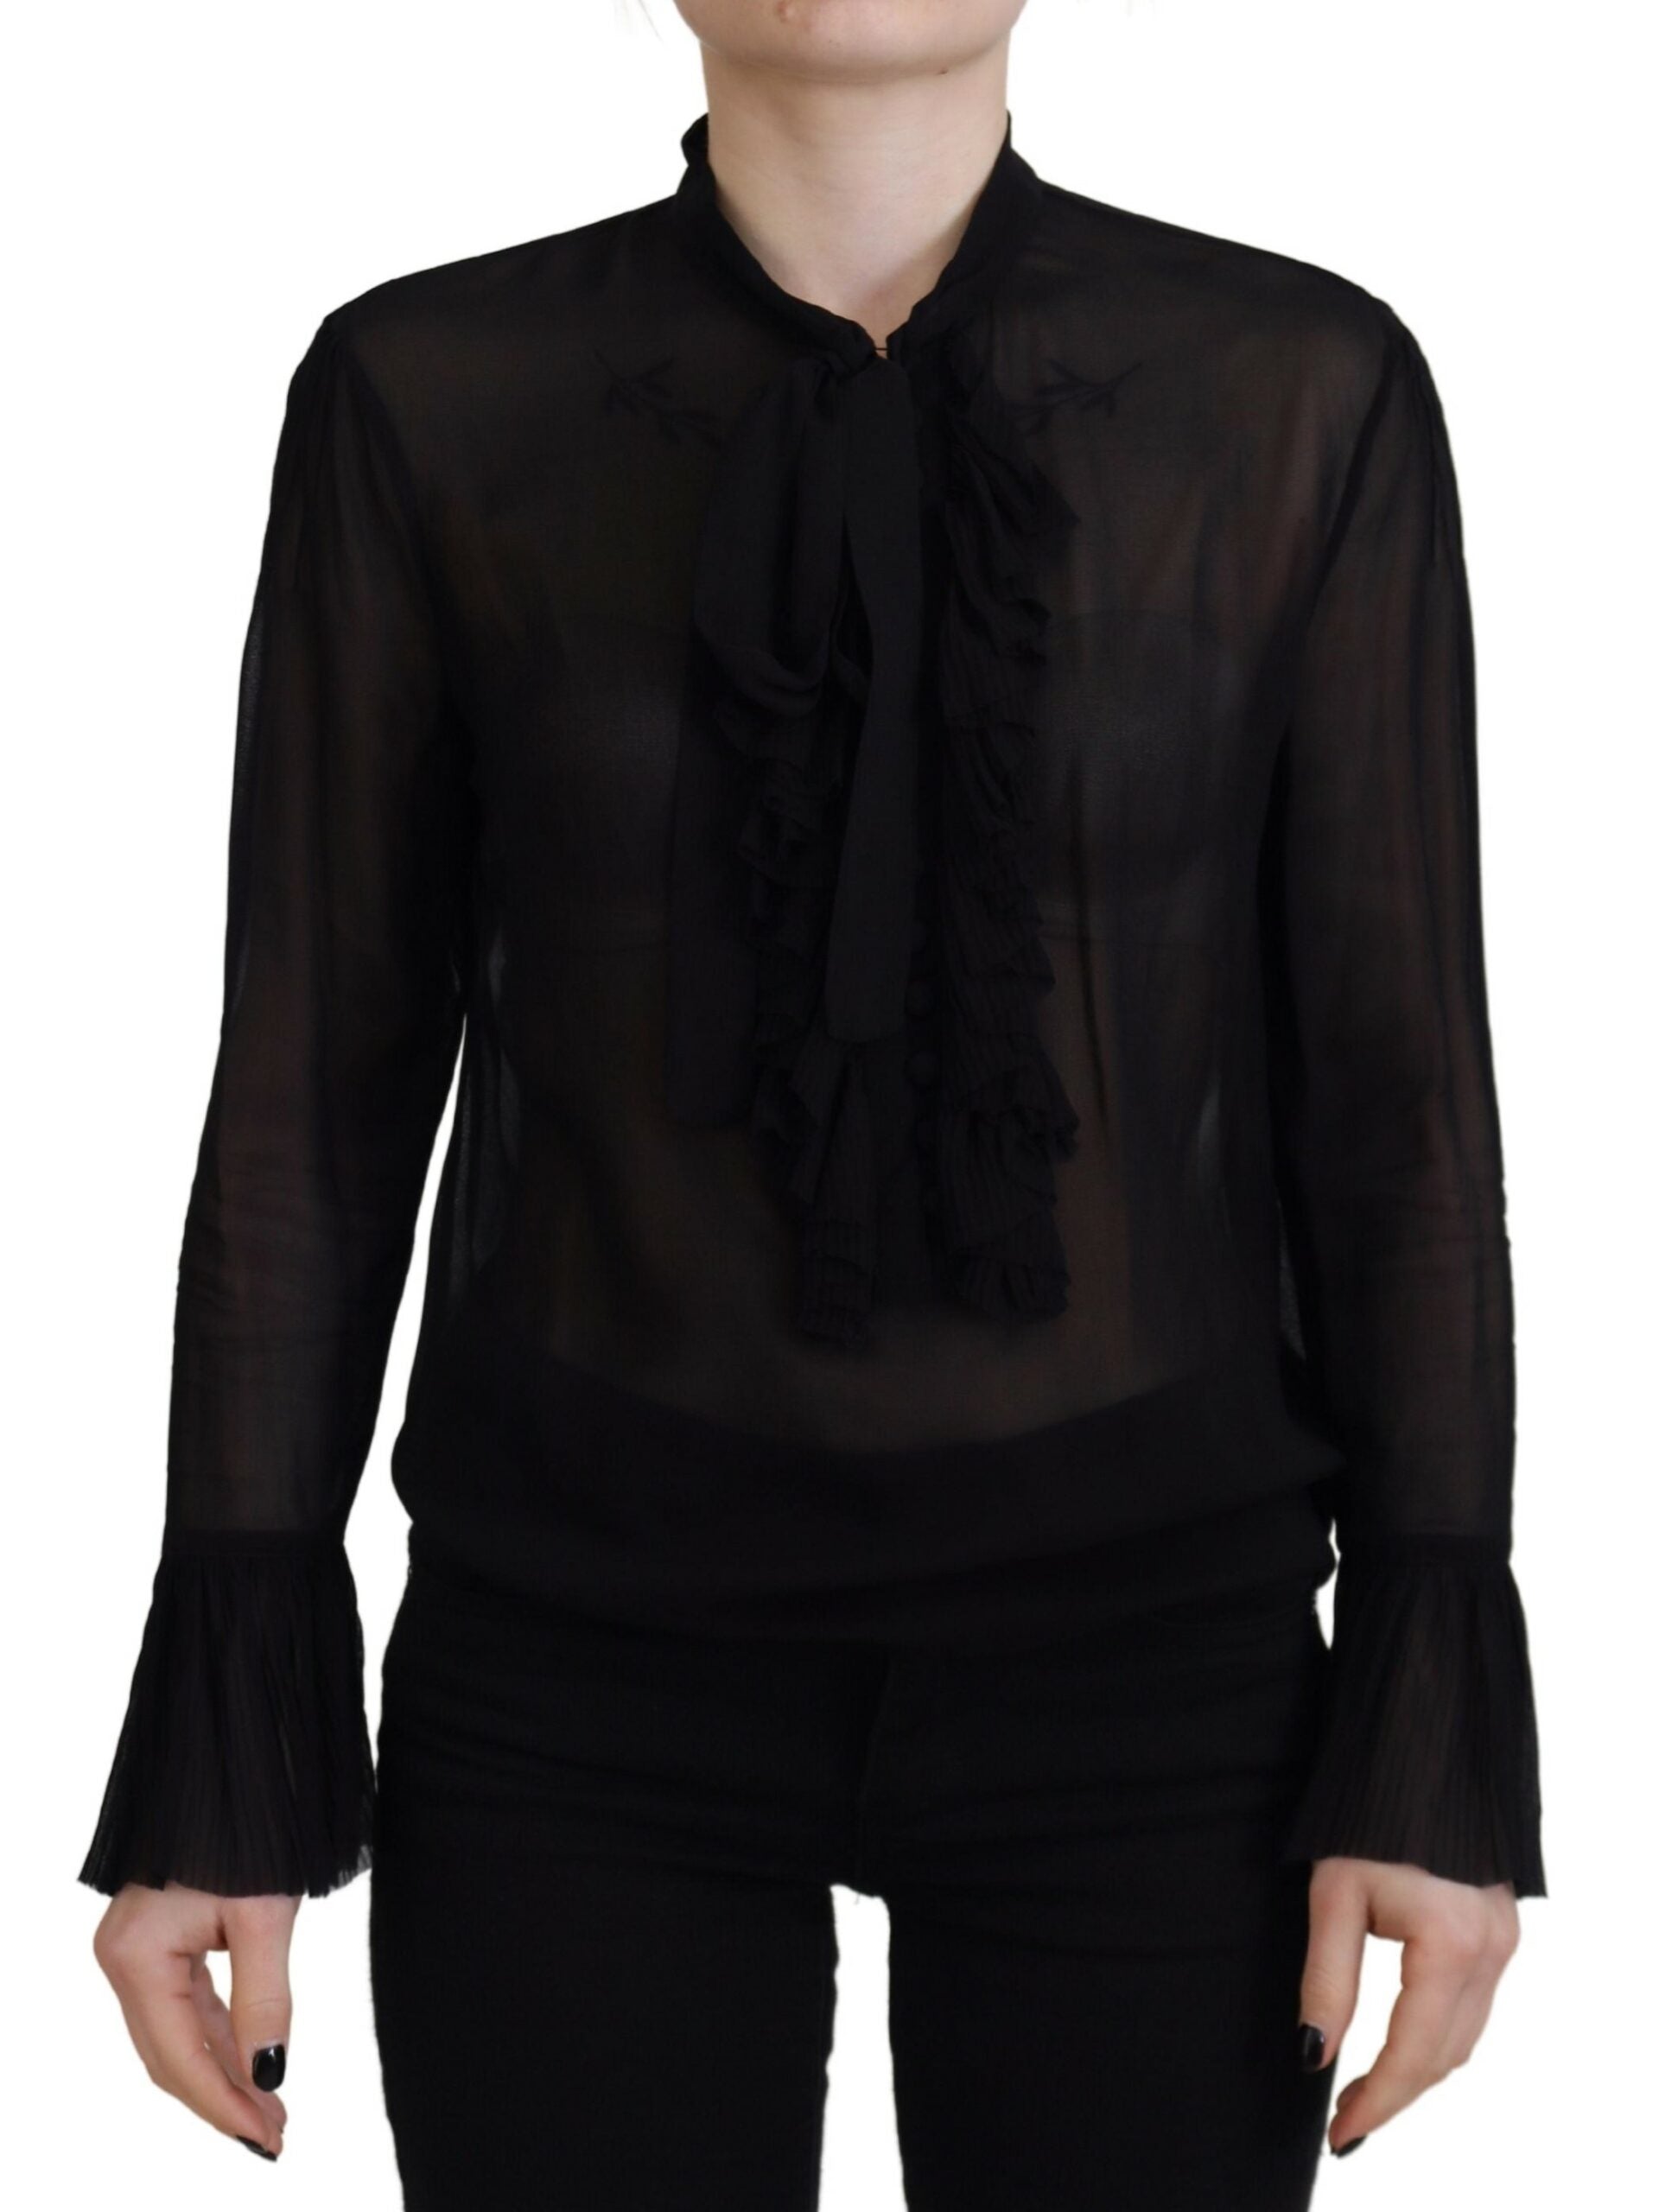 Dsquared² Black Viscose Long Sleeves See Through Blouse Women's Top